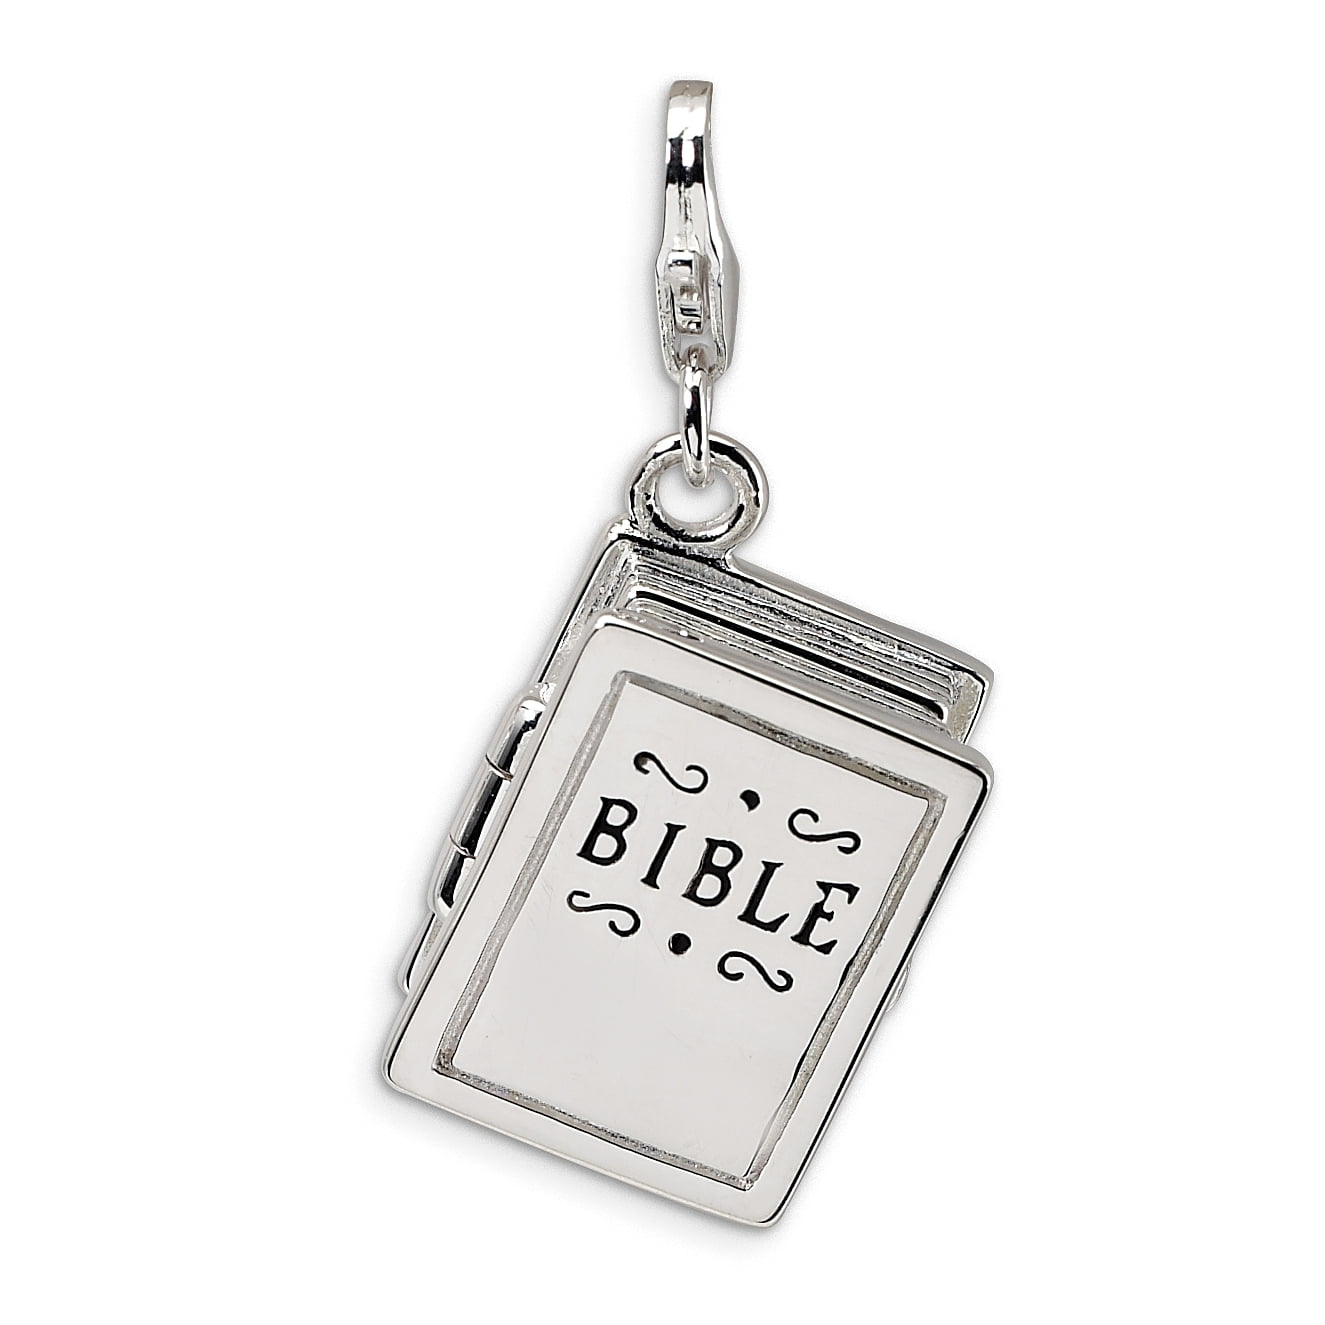 STERLING SILVER OPENING ENAMELLED HOLY BIBLE CHARM                